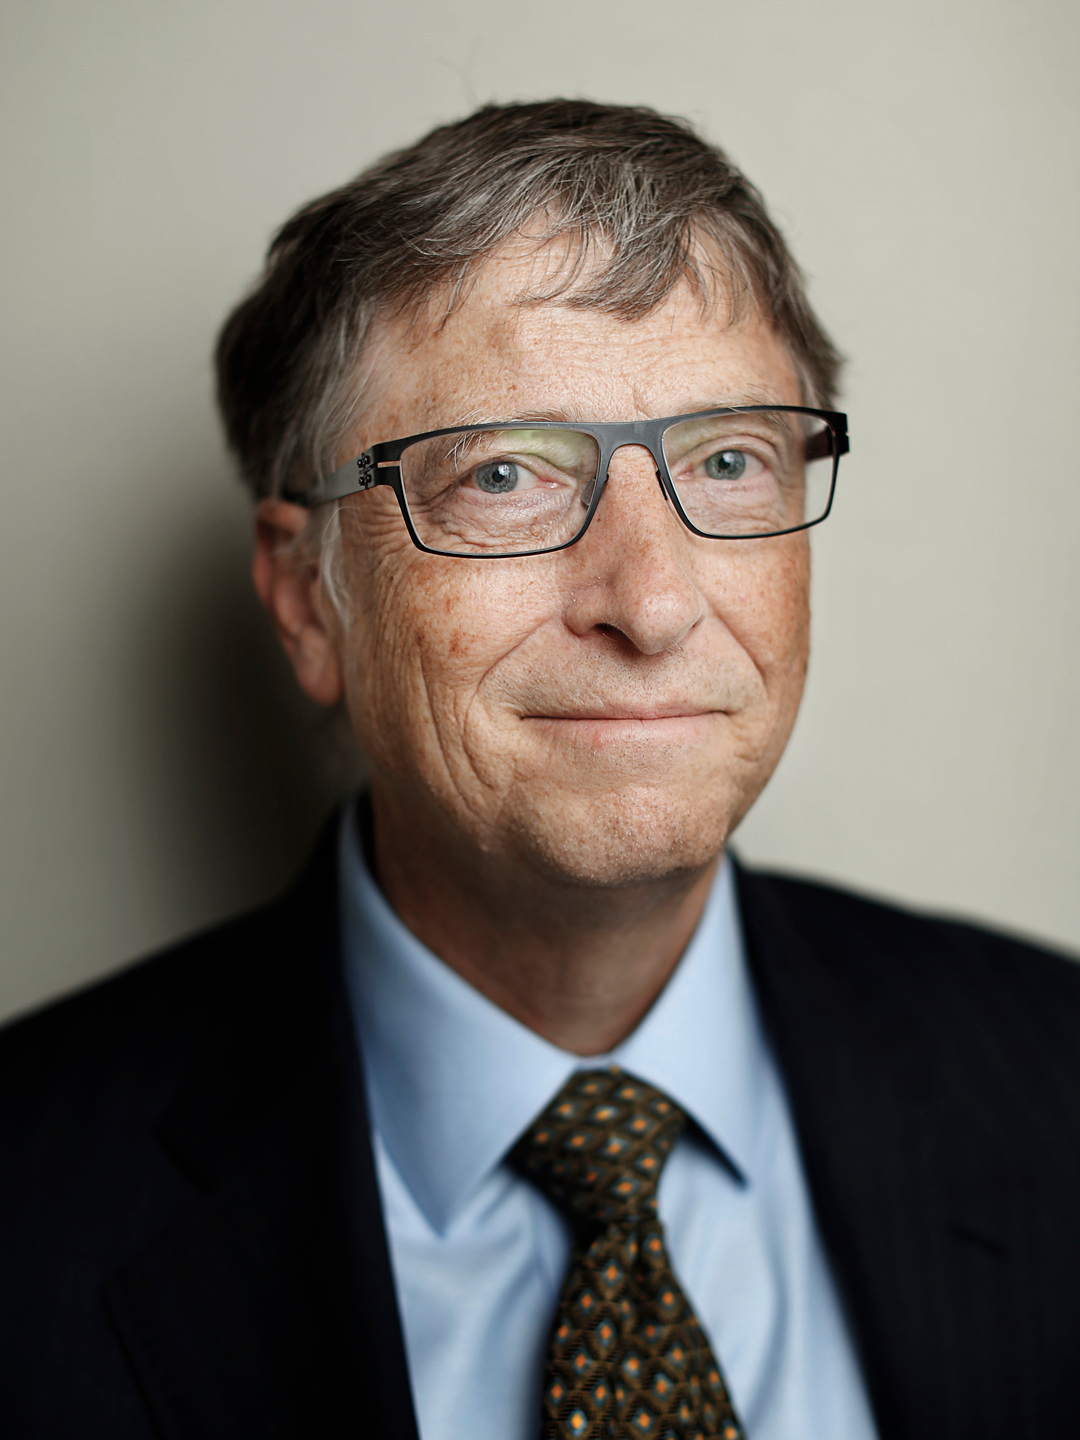 Bill Gates in his youth